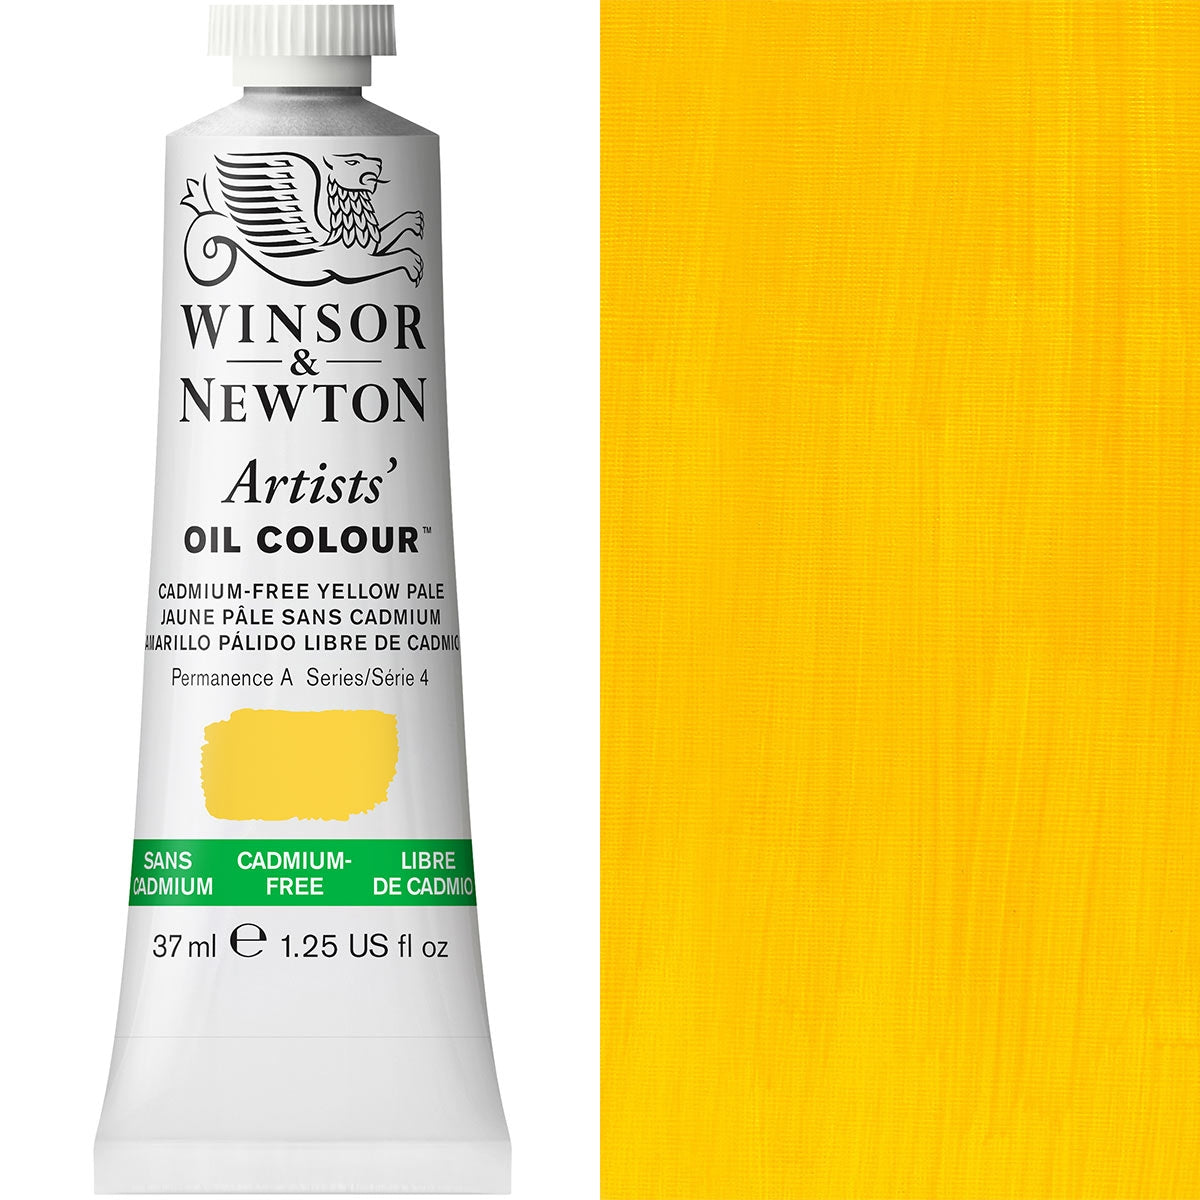 Winsor and Newton - Artists' Oil Colour - 37ml - Cad Free Yellow Pale